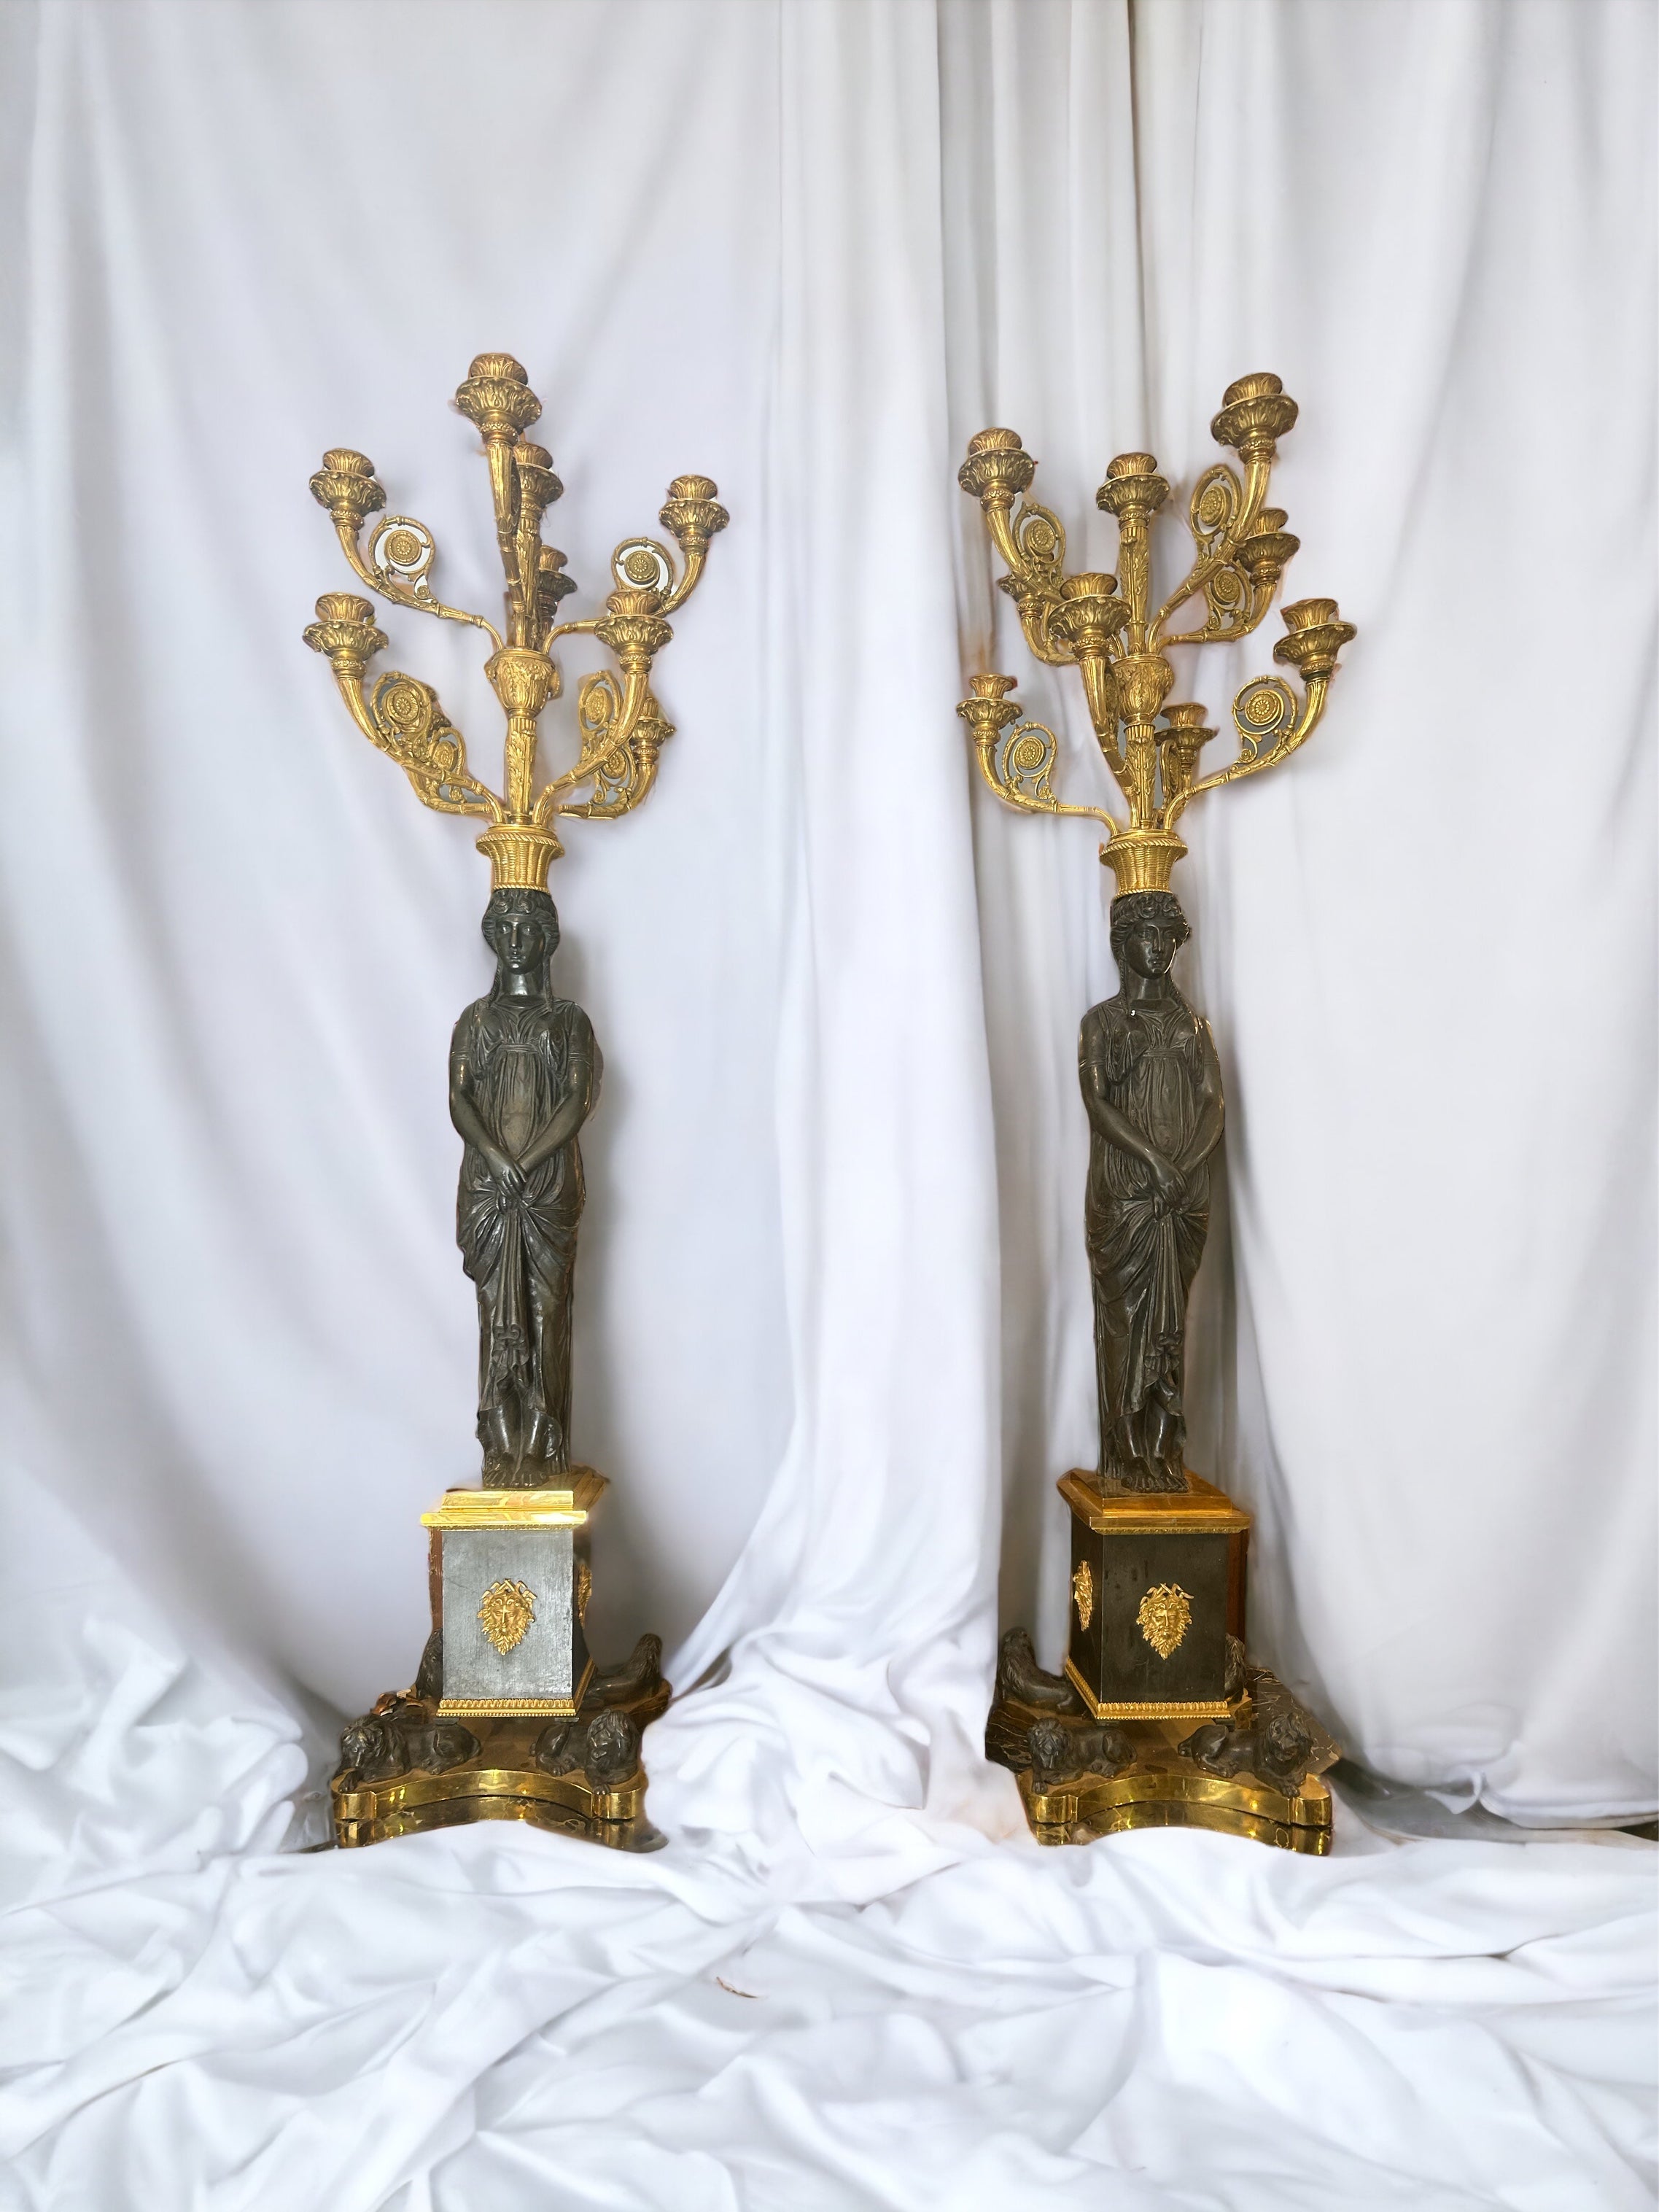 Rare pair of large Empire candlesticks of excellent workmanship in gilded and patinated bronze from the so-called 